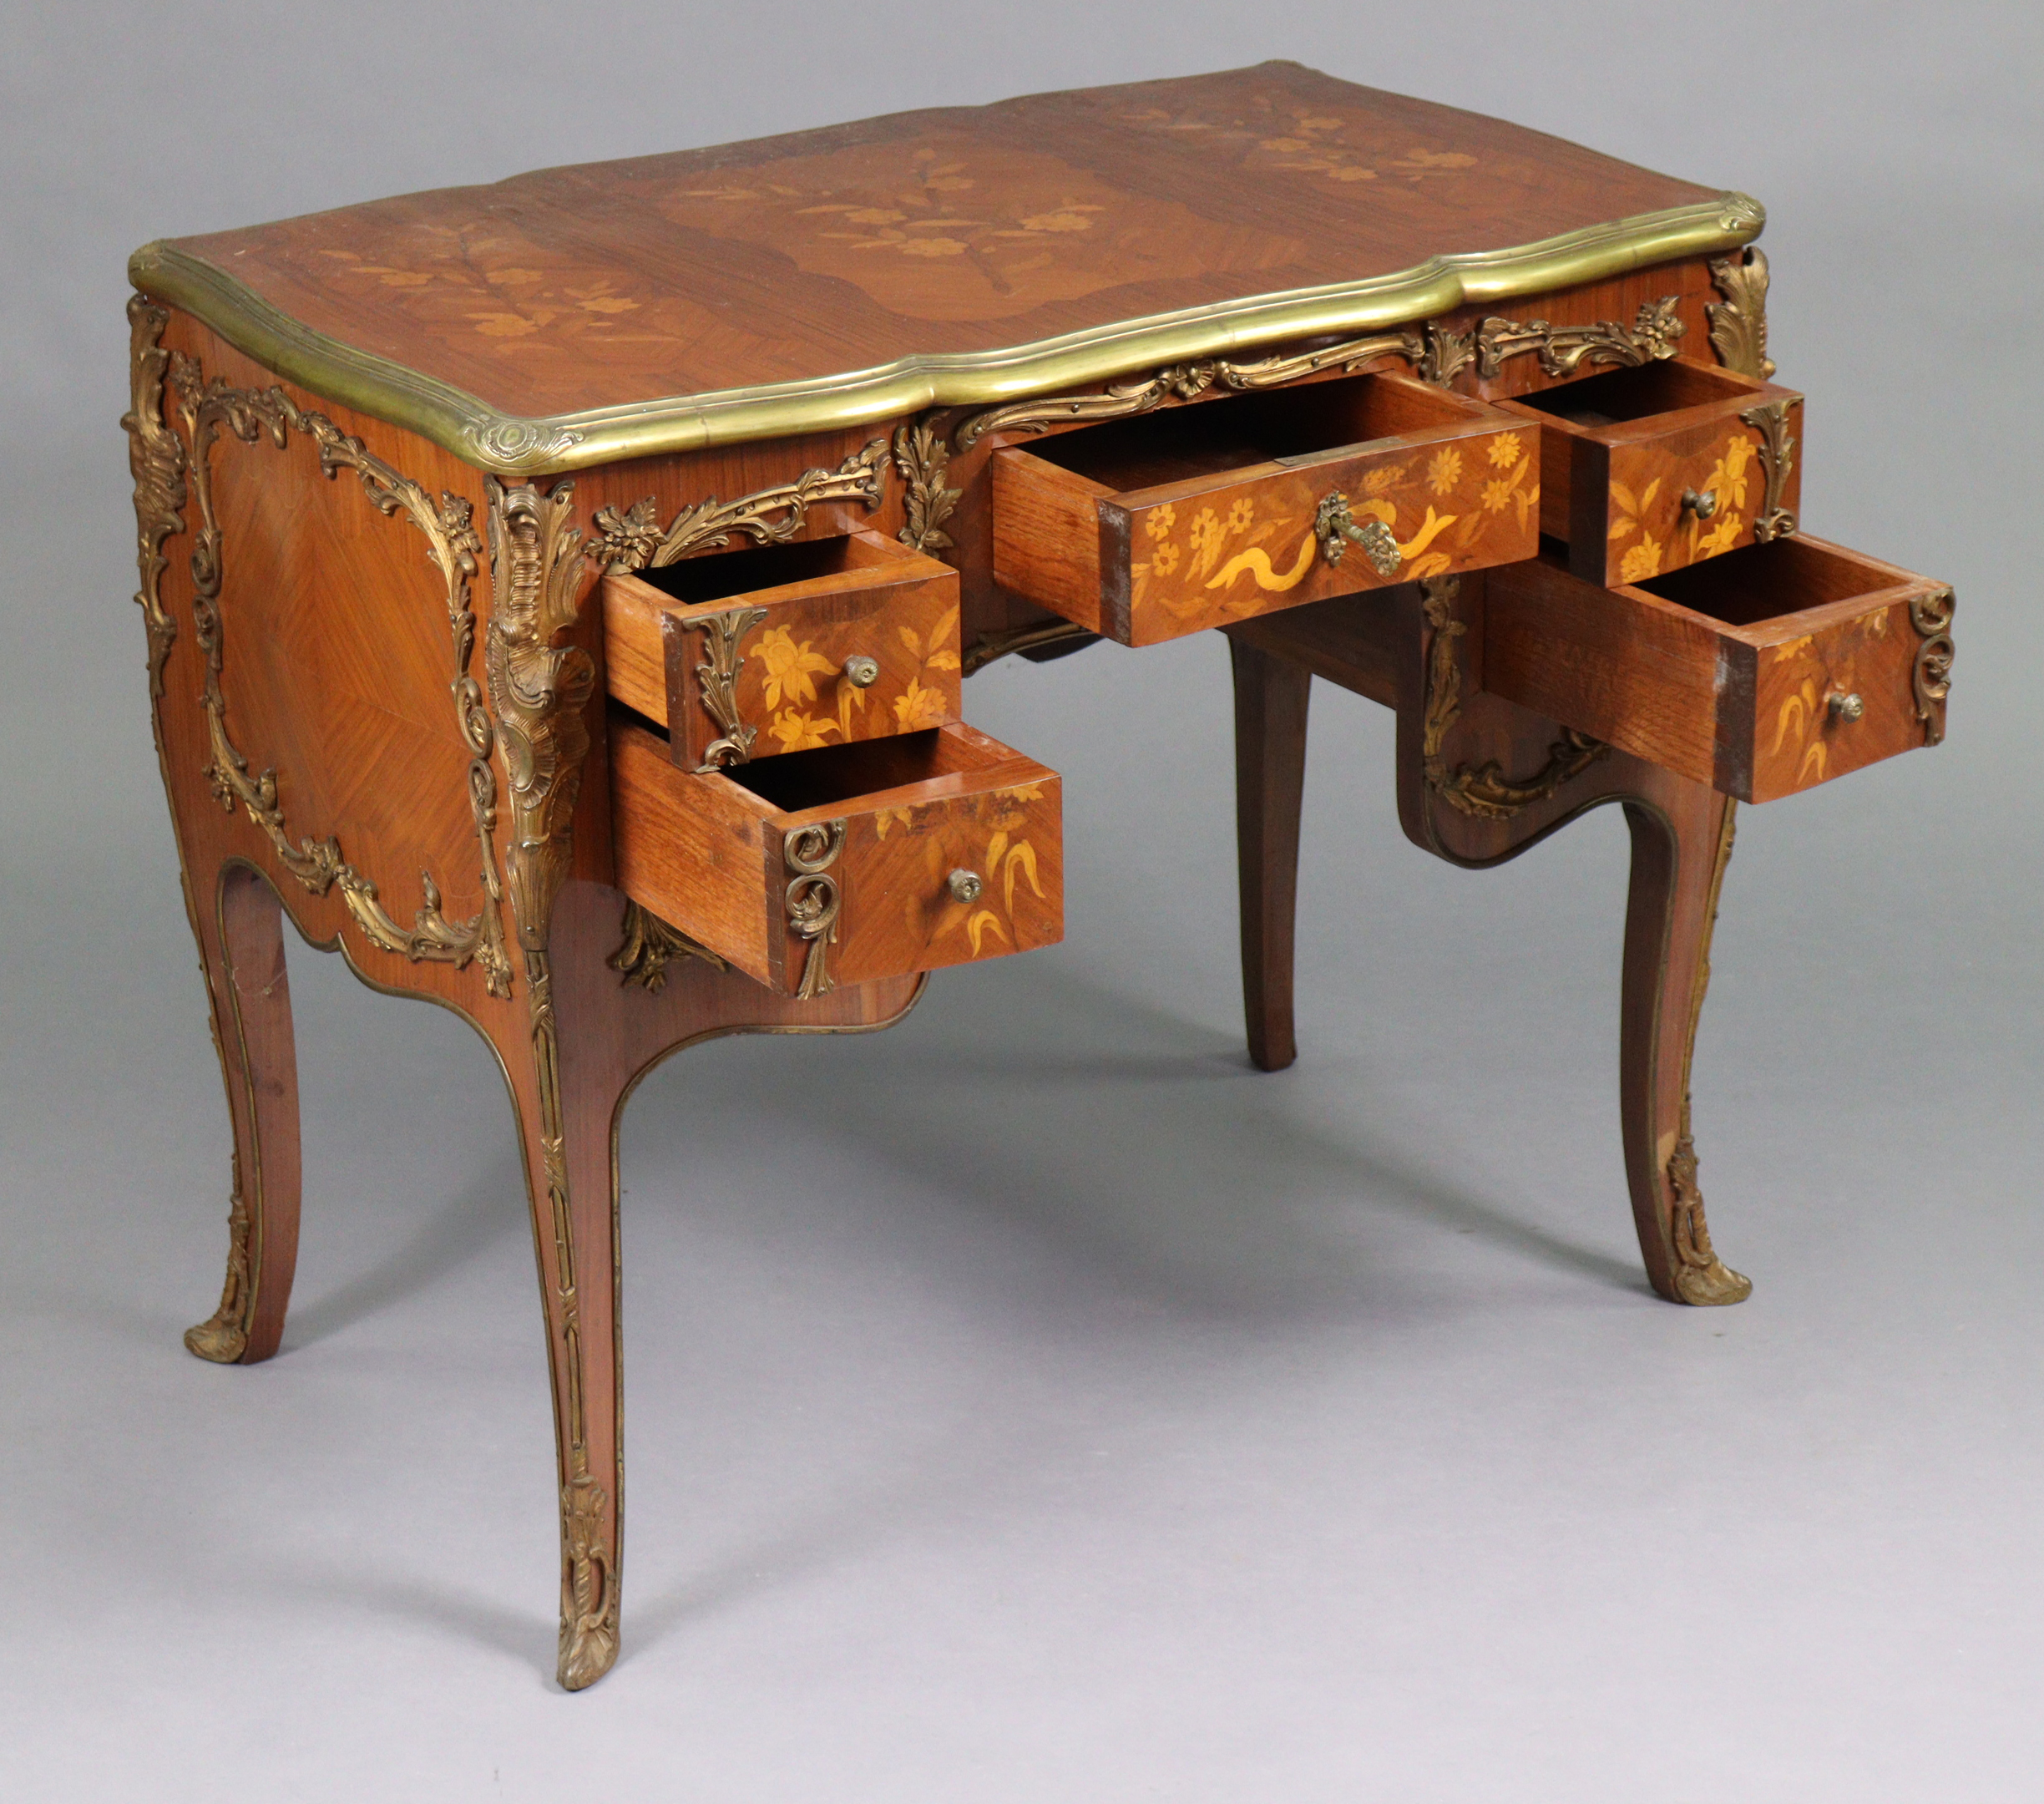 Louis XV style Marquetry Inlaid Brass Bound Desk - Image 2 of 2